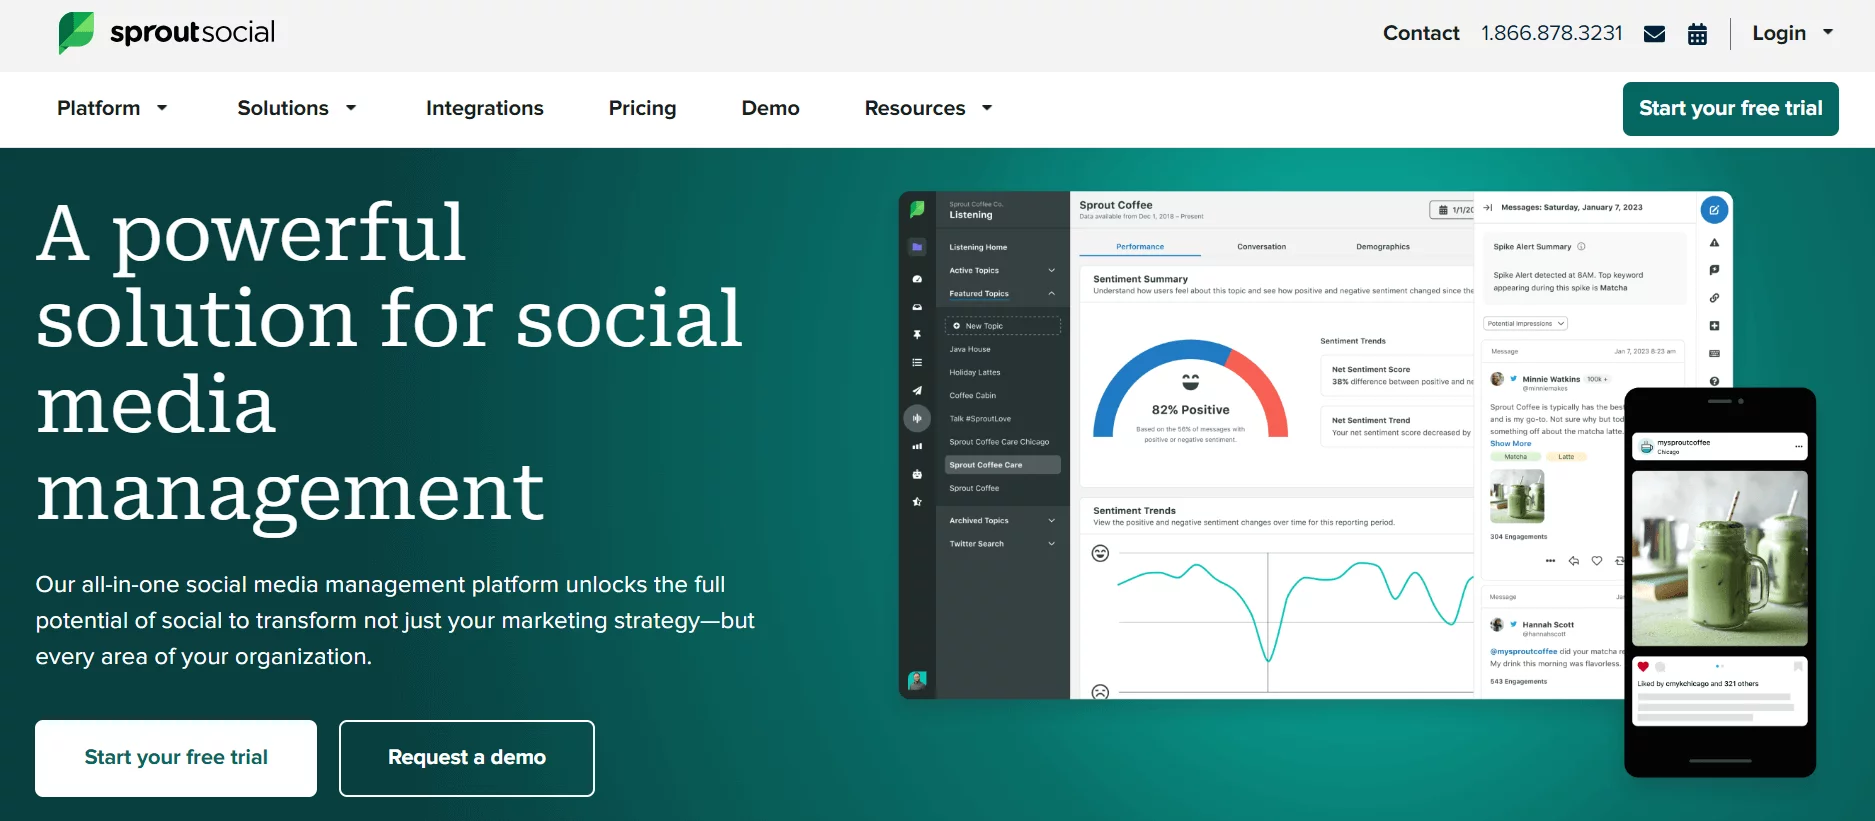 Sprout Social homepage screenshot with green background and screenshot of a social media analytics dashboard